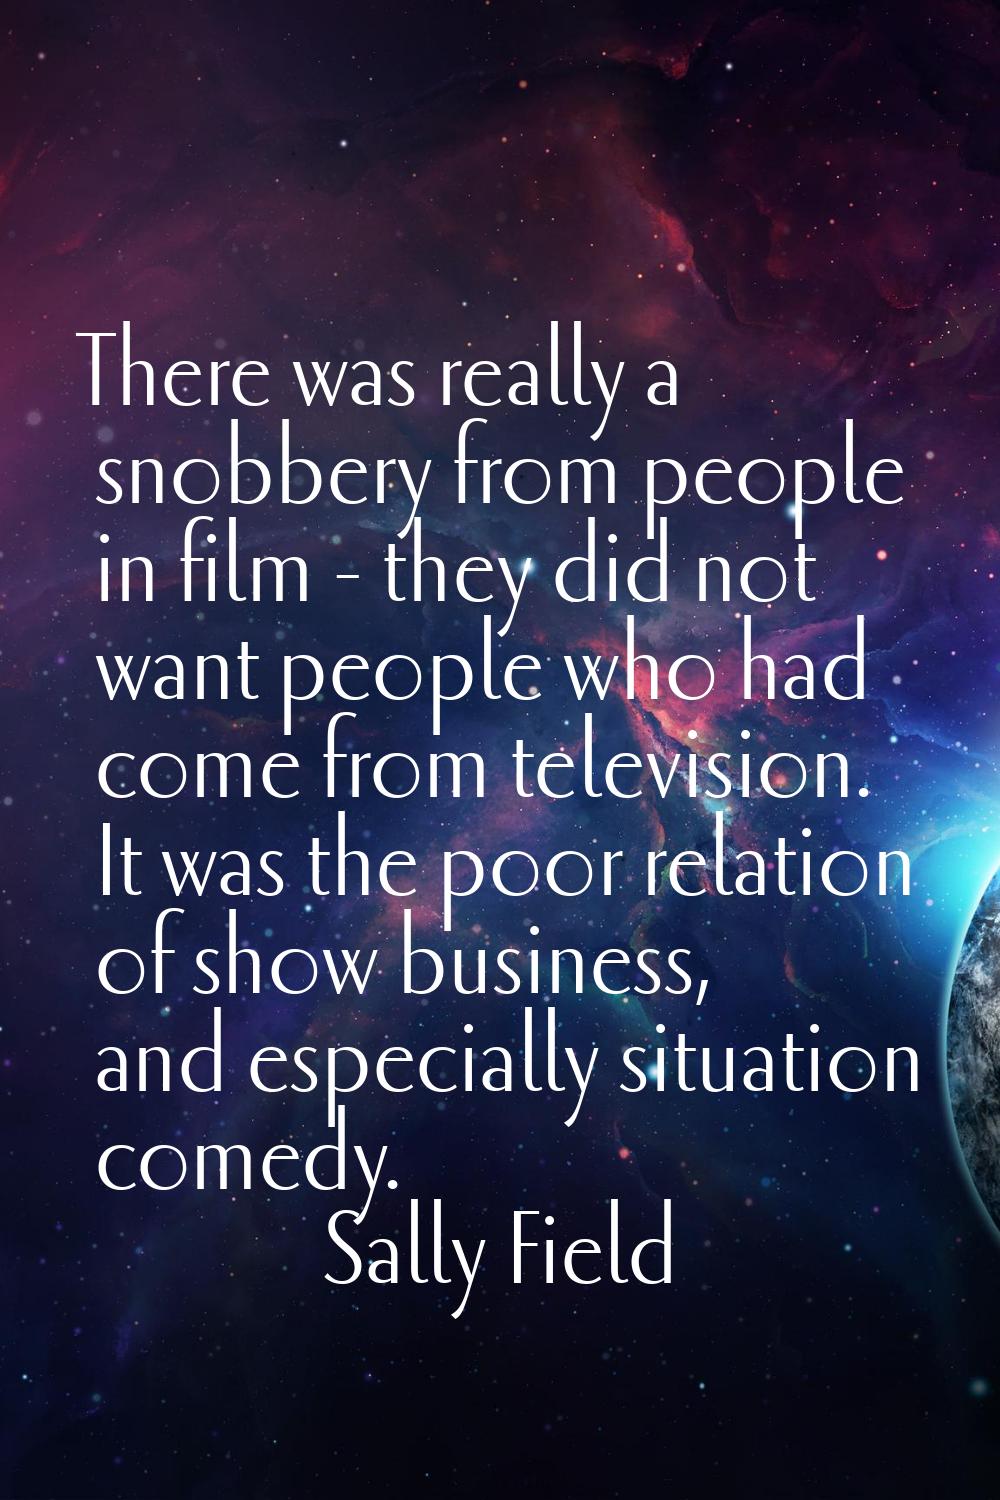 There was really a snobbery from people in film - they did not want people who had come from televi